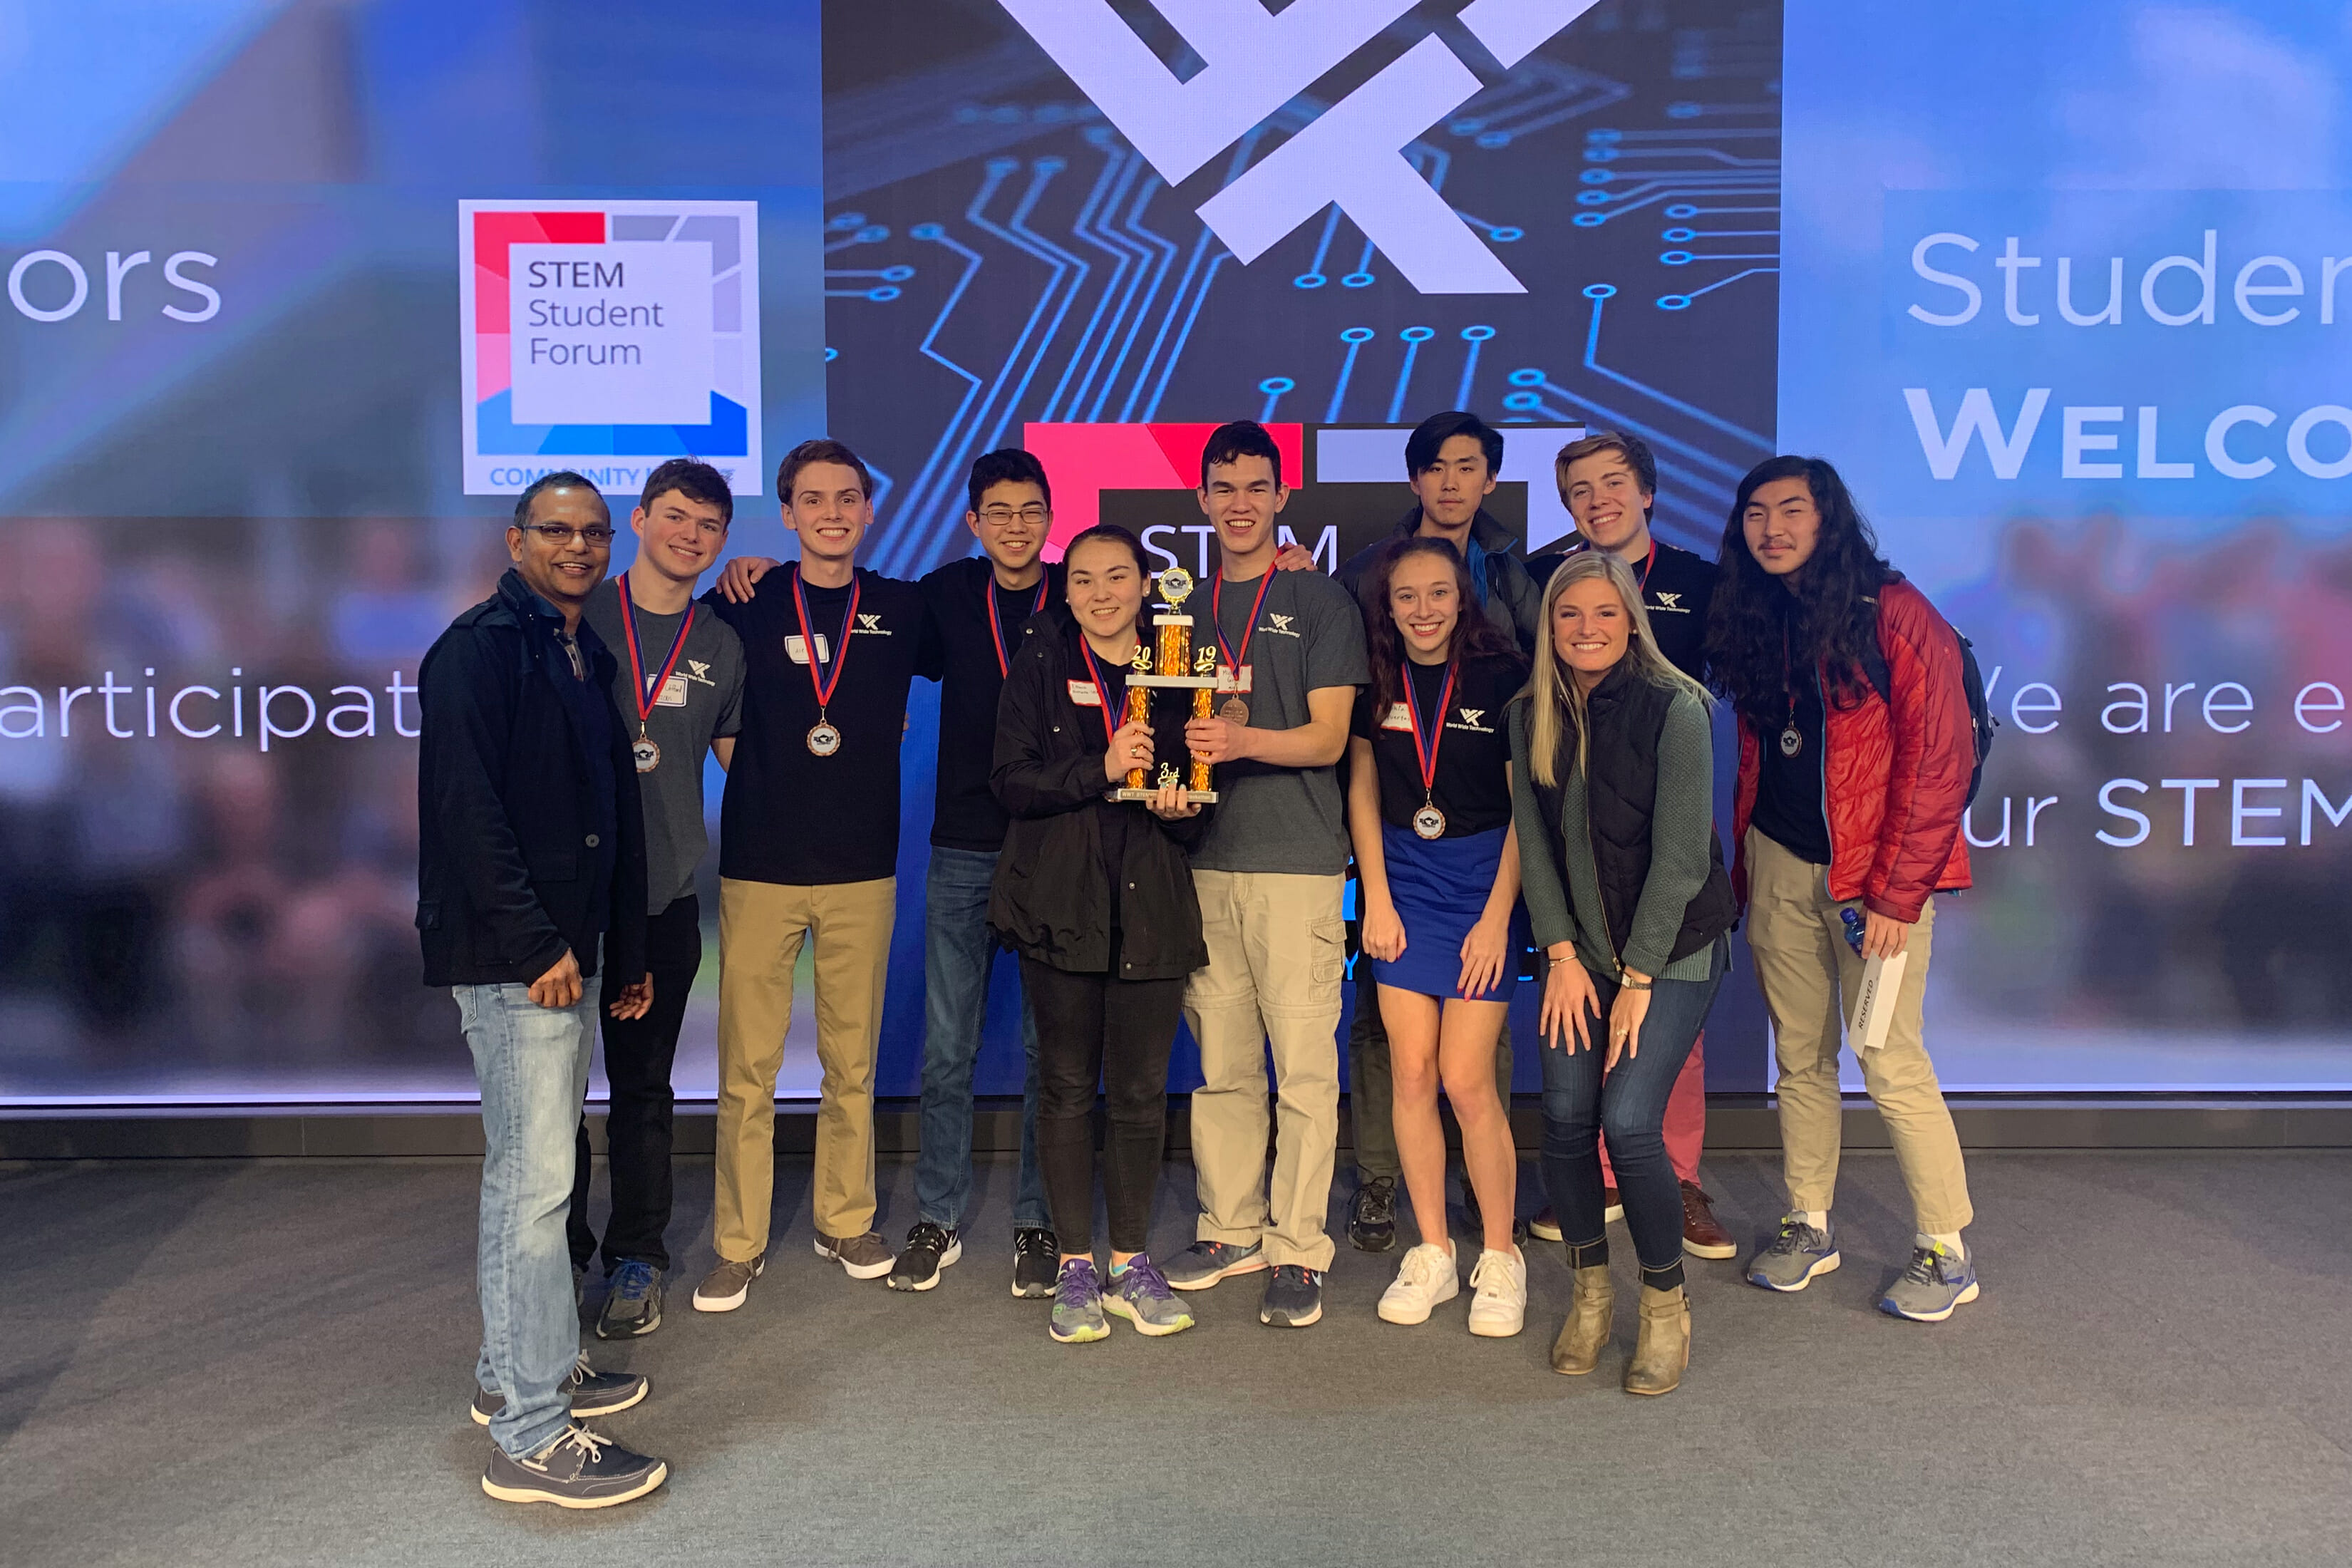 MICDS coders earn 3rd place at World Wide Technology Hackathon.